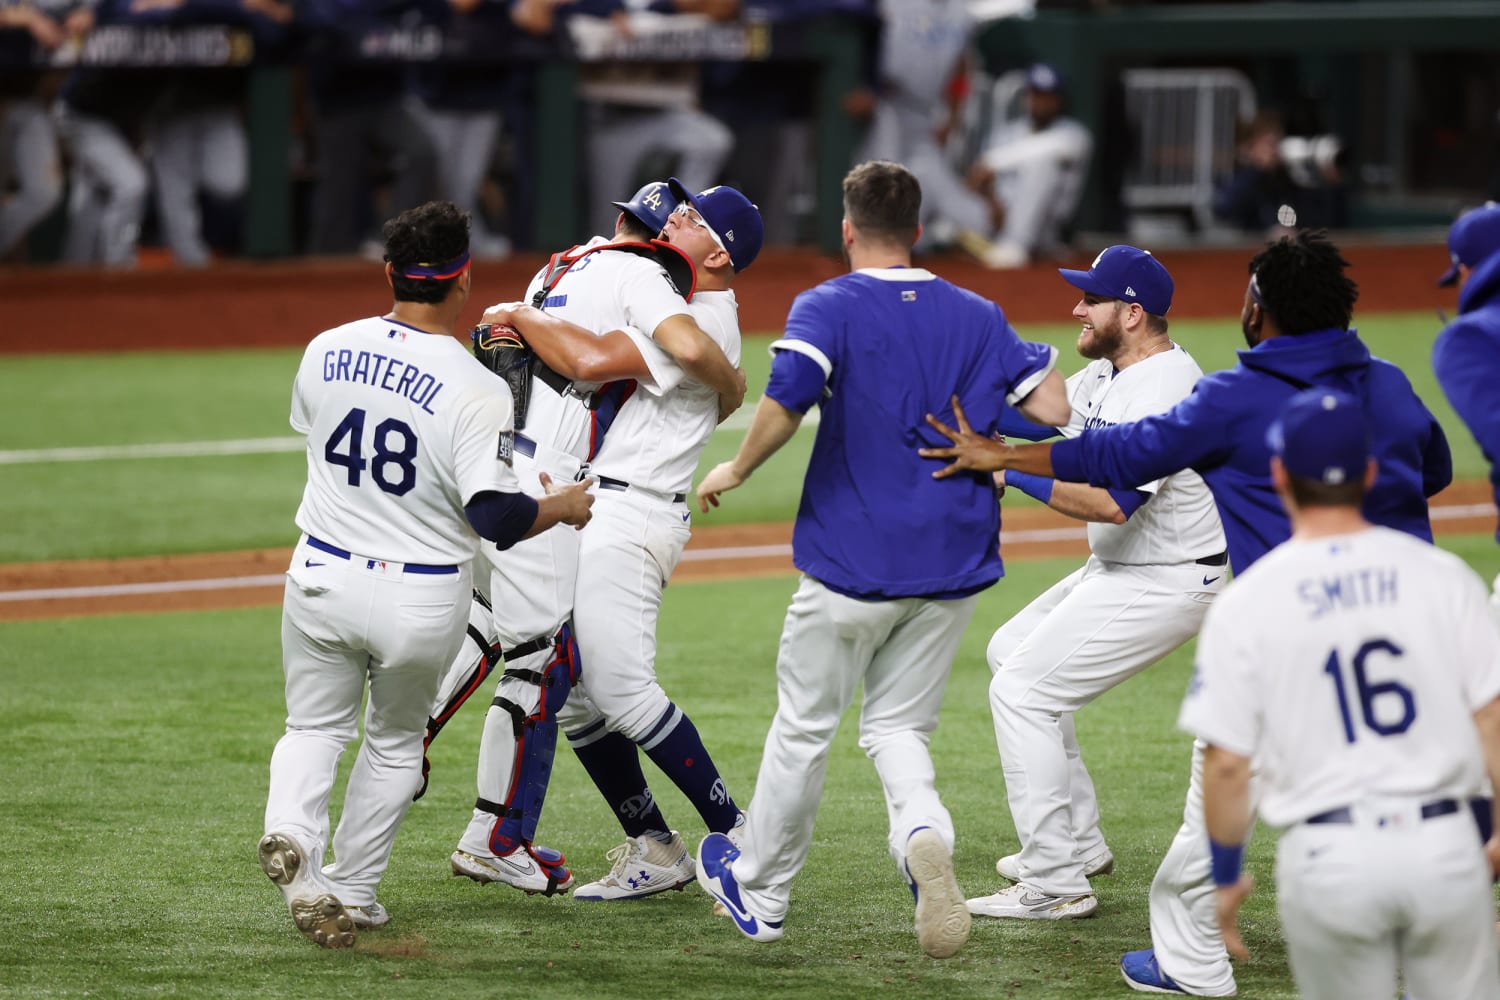 Dodgers rally to beat Rays, capture first World Series title since 1988